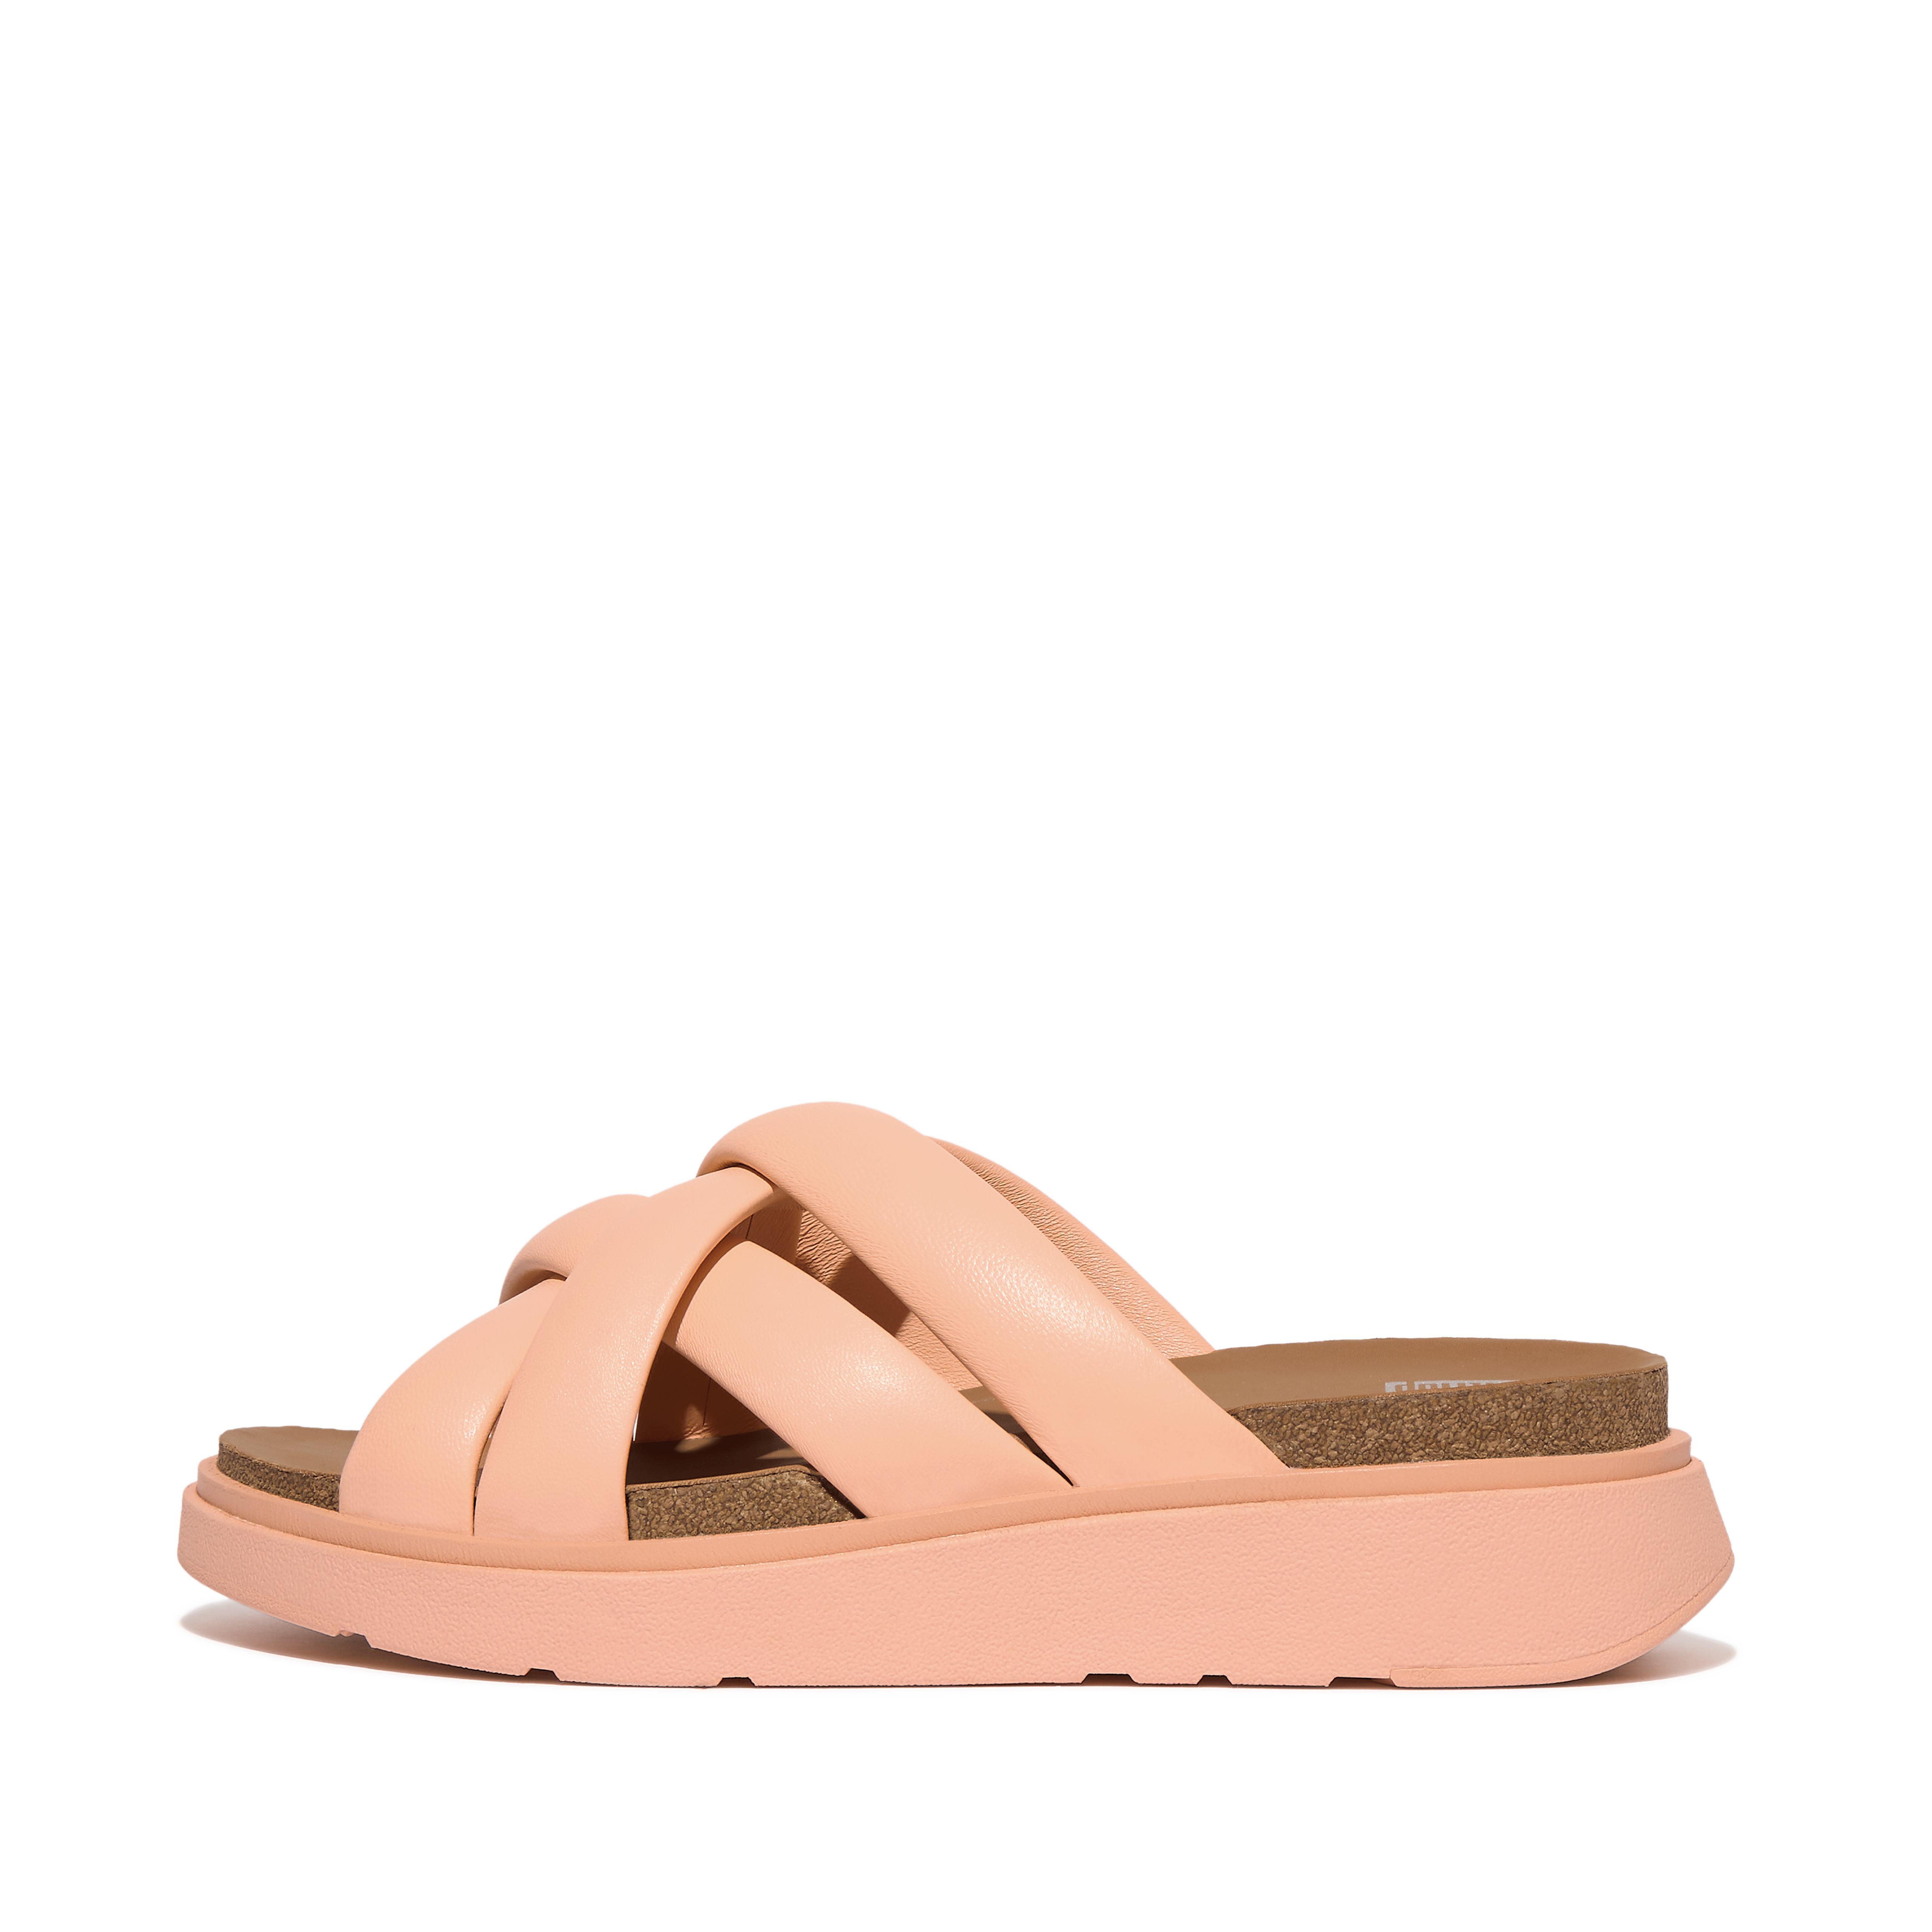 Fitflop Padded-Strap Leather Slides,Blushy